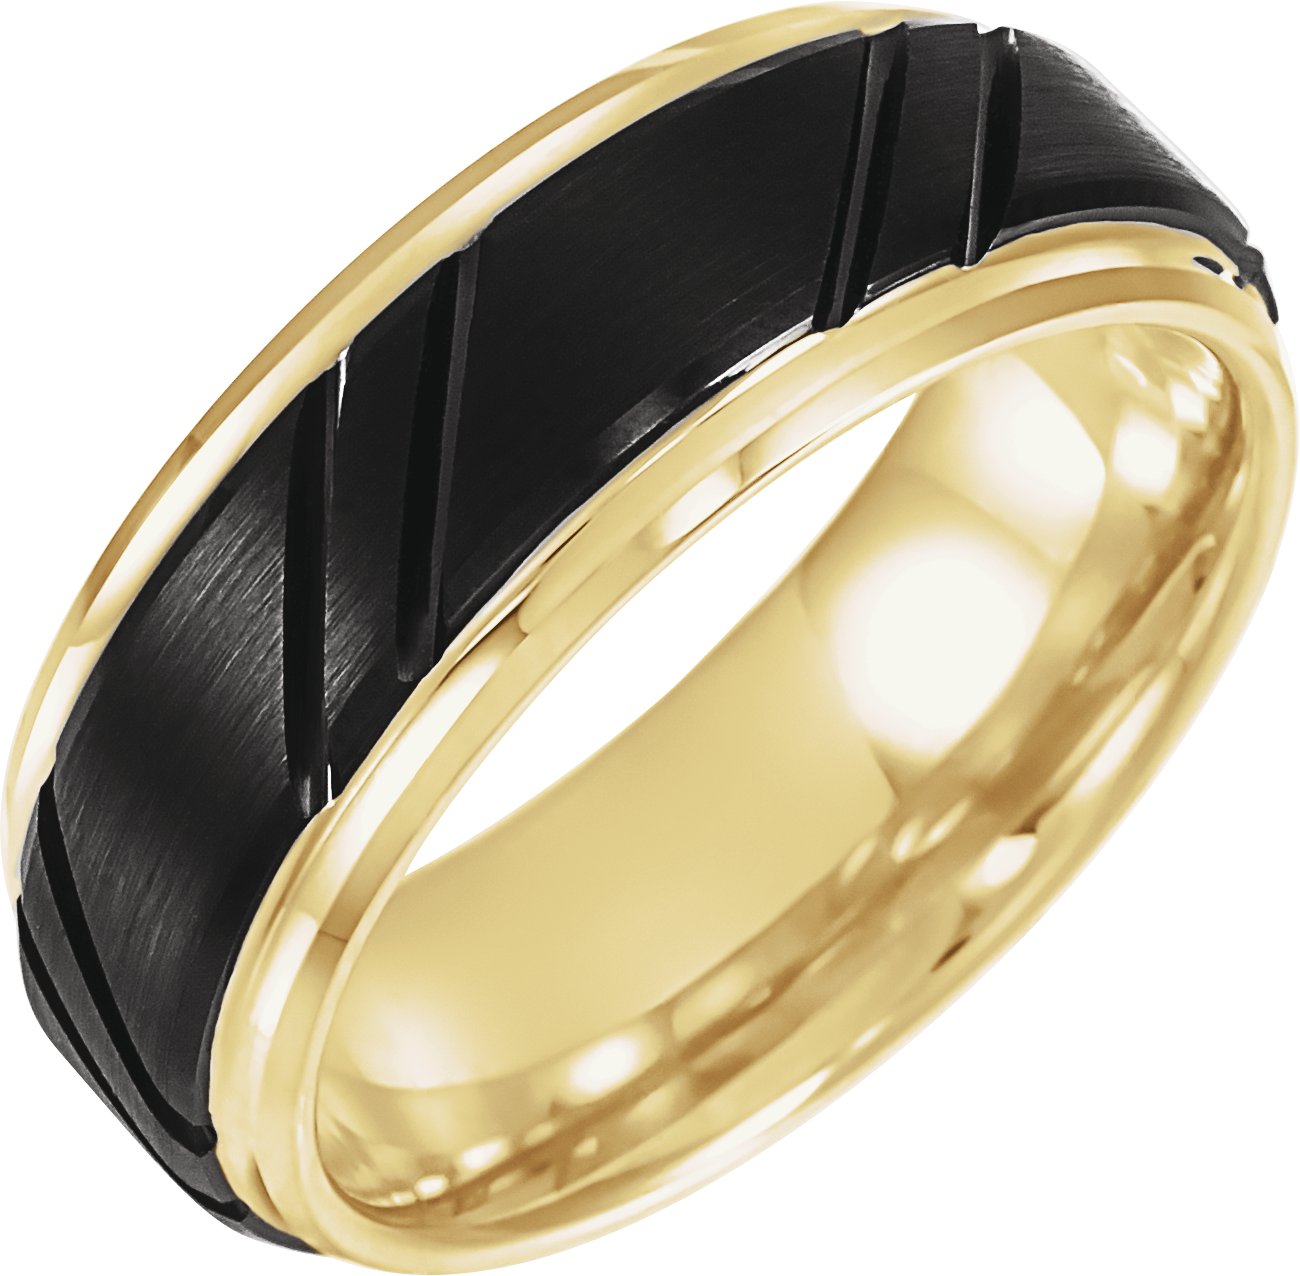 18K Yellow Gold-Plated & Black PVD Tungsten 8 mm Grooved Band Size 9